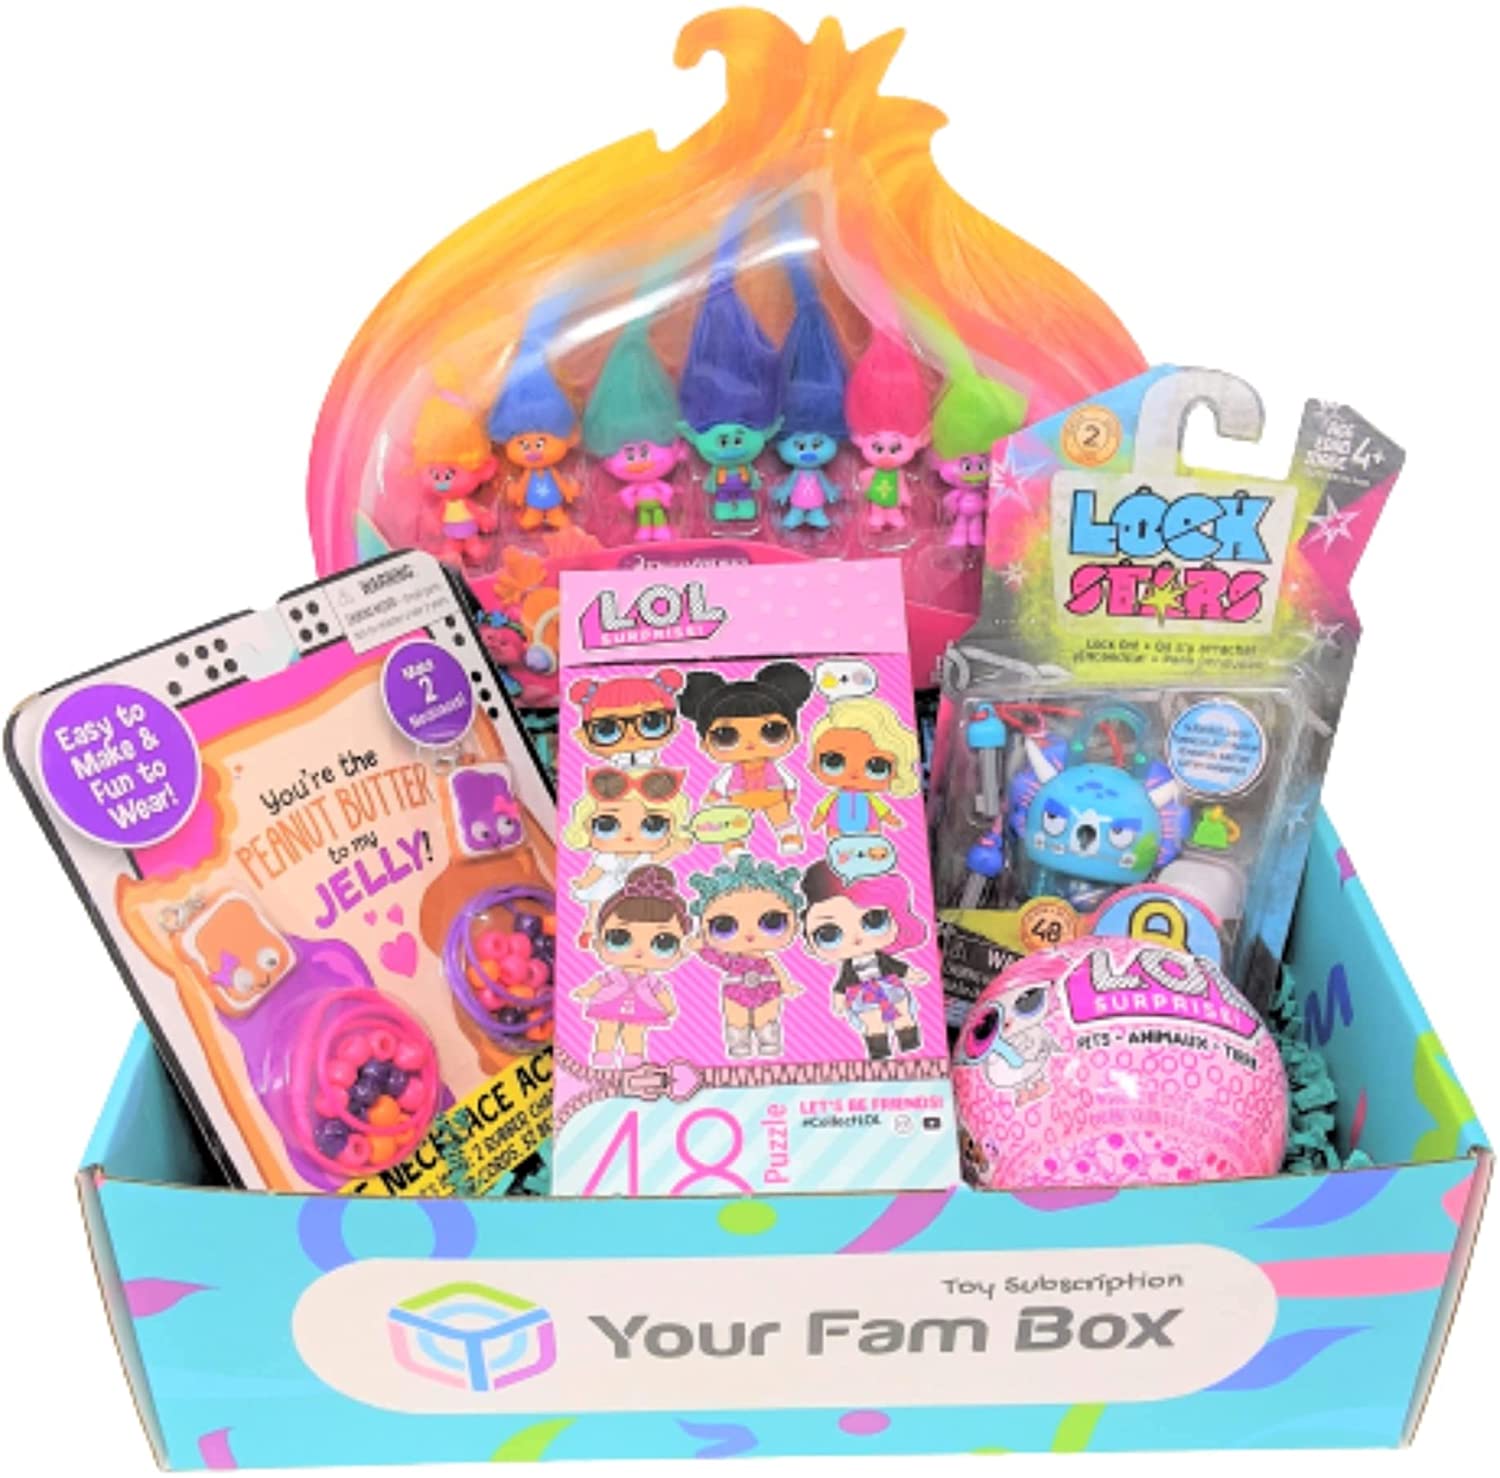 Your Fam Box - Toy Subscription Box